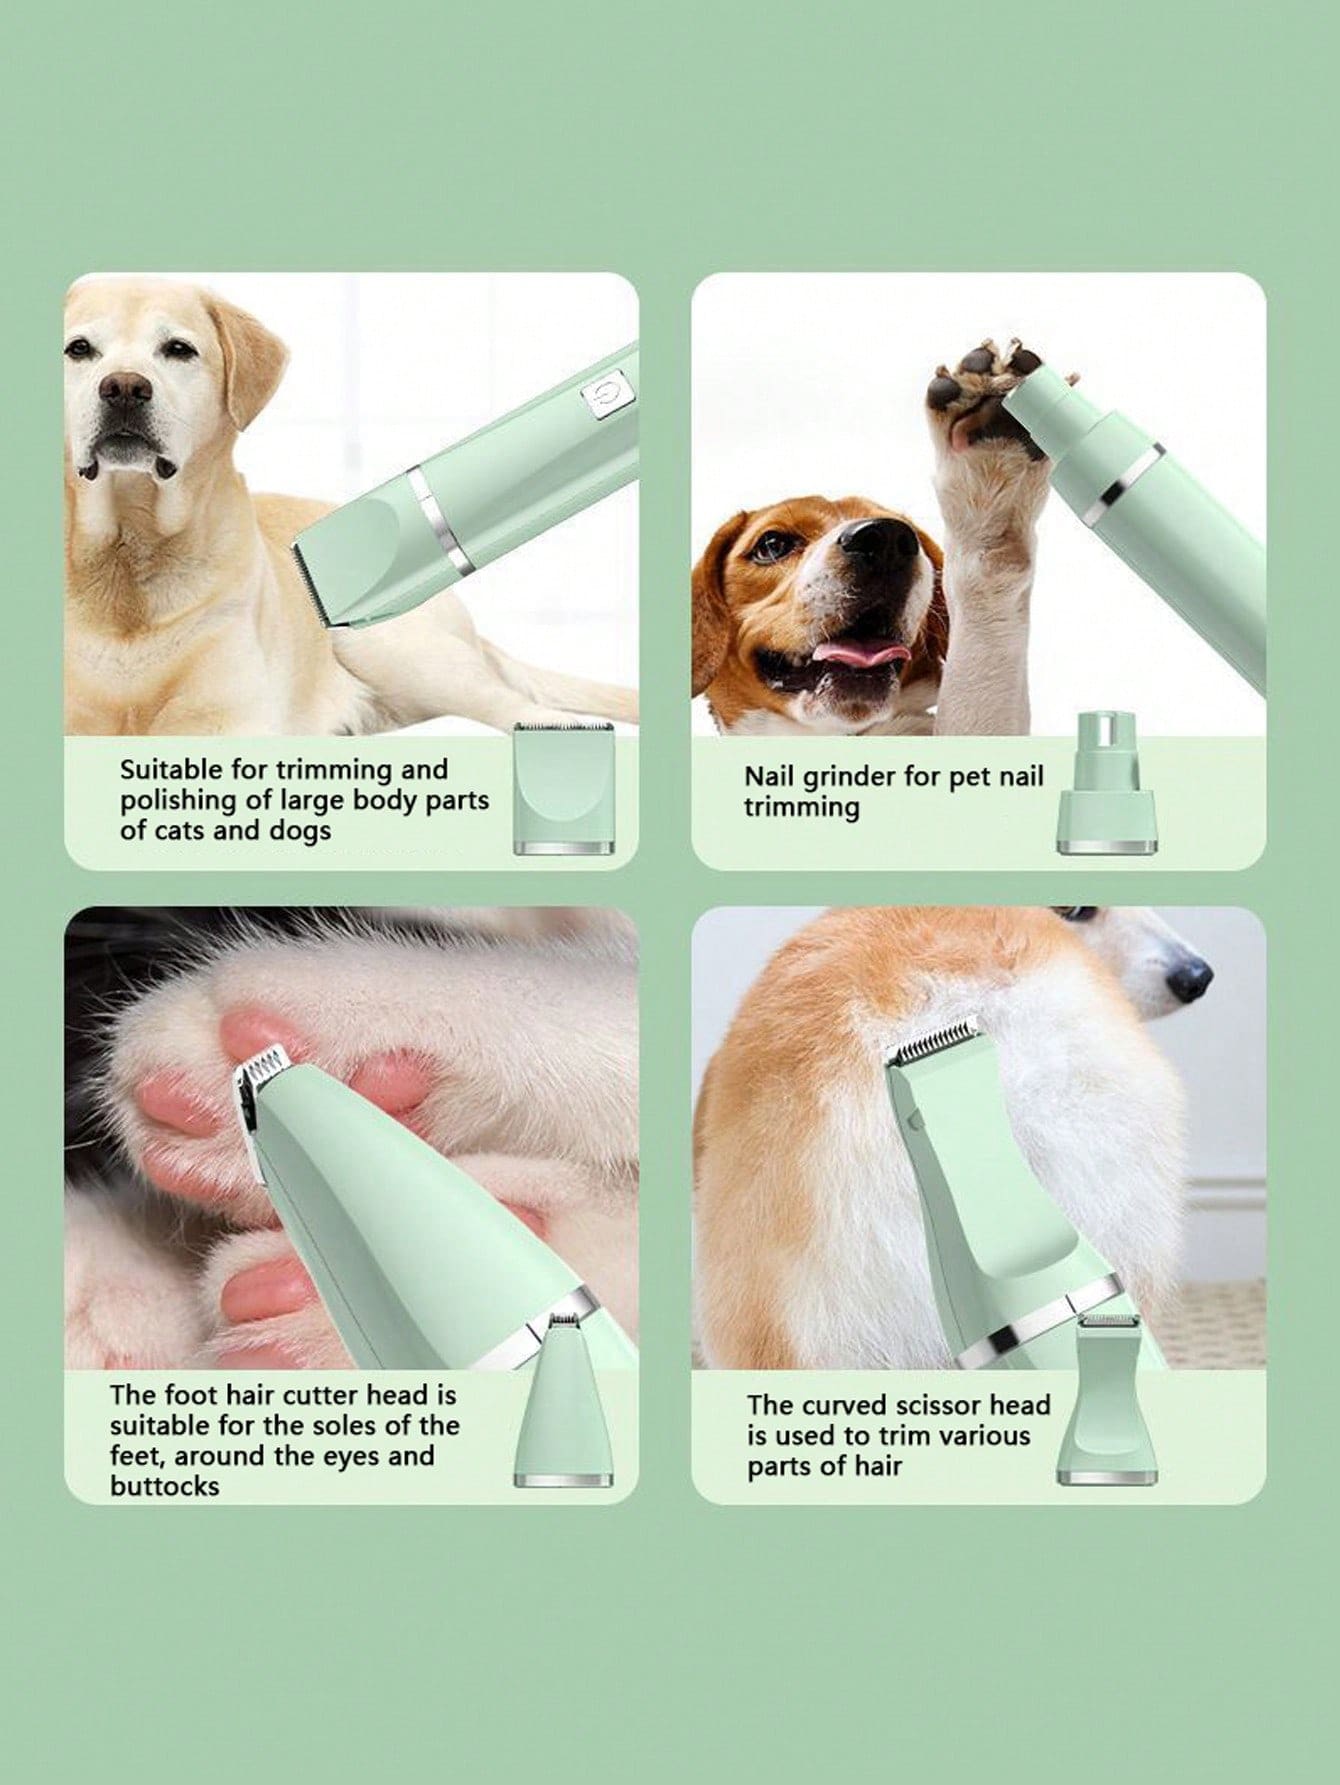 Pet Hair Clipper Electric Trimmer For Dogs And Cats, Foot Hair Trimming, Beauty Tool